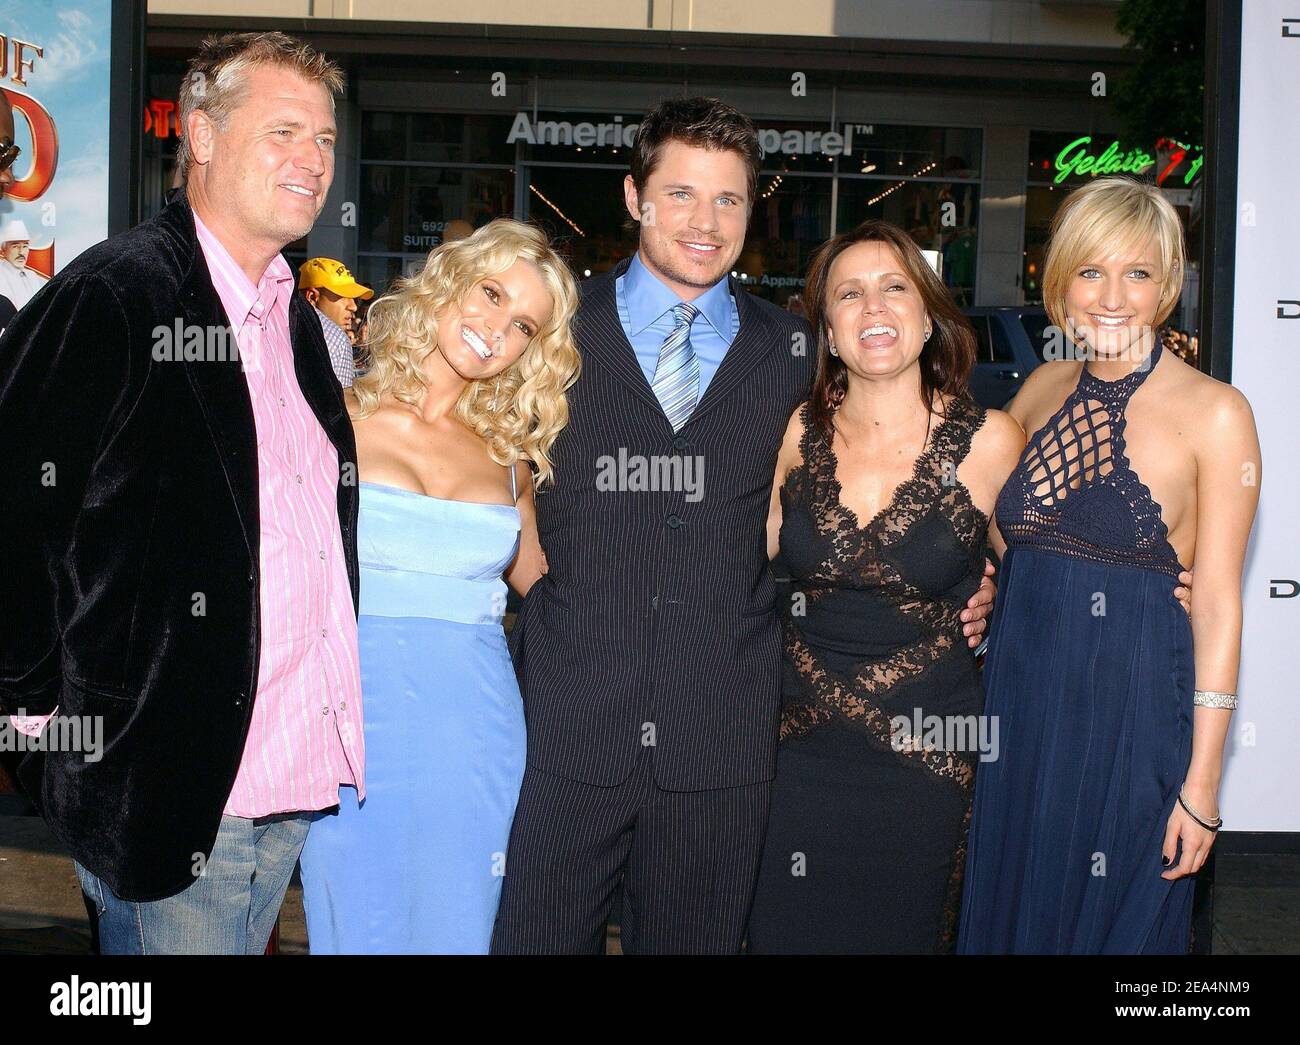 Cast member Jessica Simpson (2nd L) surrounded by her father Joe Simpson (L), her husband Nick Lachey (C), her mother Tina Simpson (2nd R) and her sister Ashlee Simpson attends the premiere of Warner Bros 'The Dukes of Hazzard', also starring Burt Reynolds, Seann William Scott, Johnny Knoxville and Lynda Carter, held at the Grauman's Chinese Theatre in Los Angeles, CA, USA, on July 28, 2005. Photo by Lionel Hahn/ABACAPRESS.COM. Stock Photo